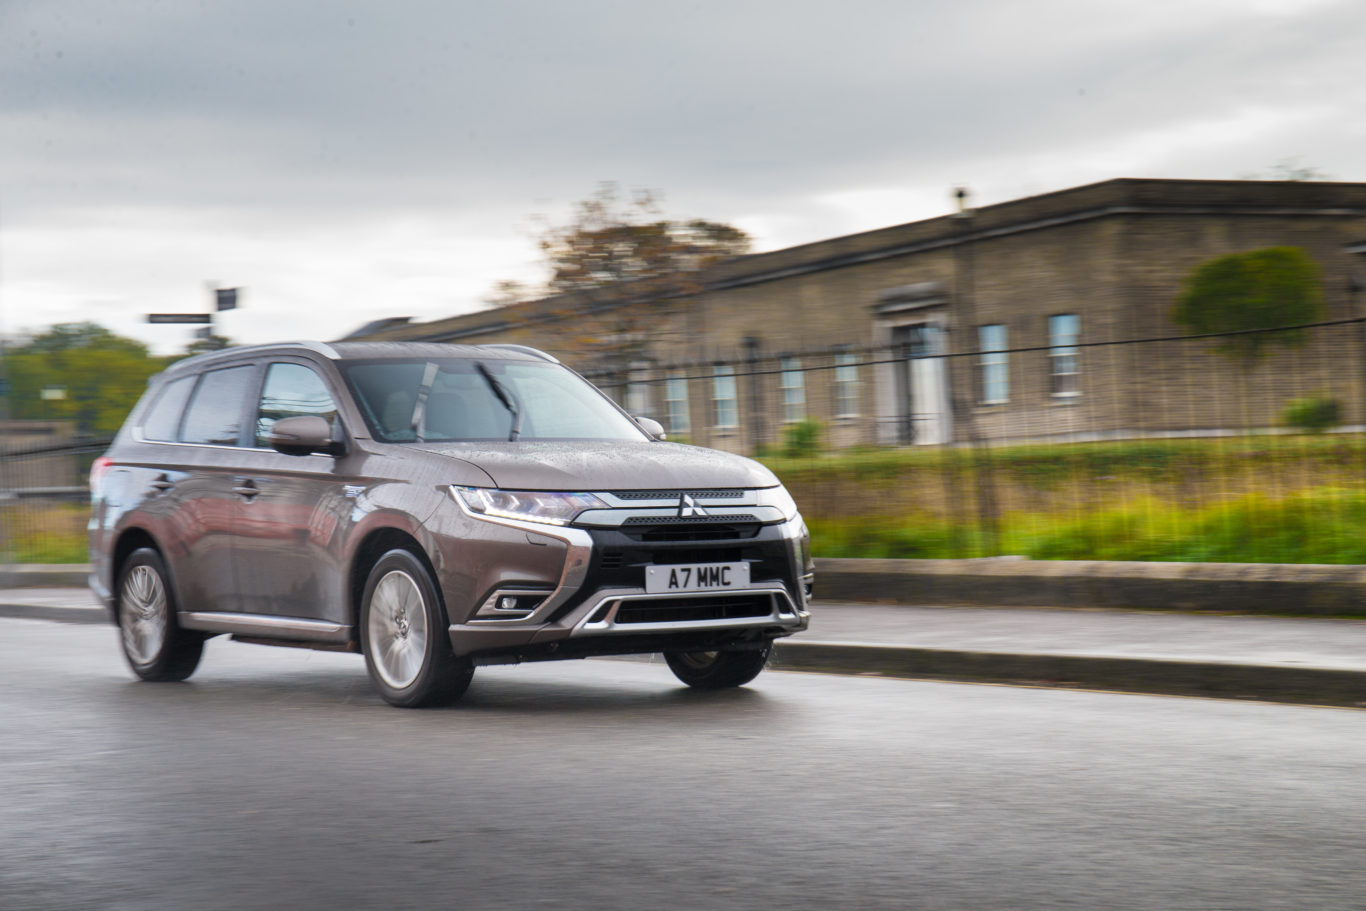 The Outlander PHEV is one of the most popular hybrids currently on sale